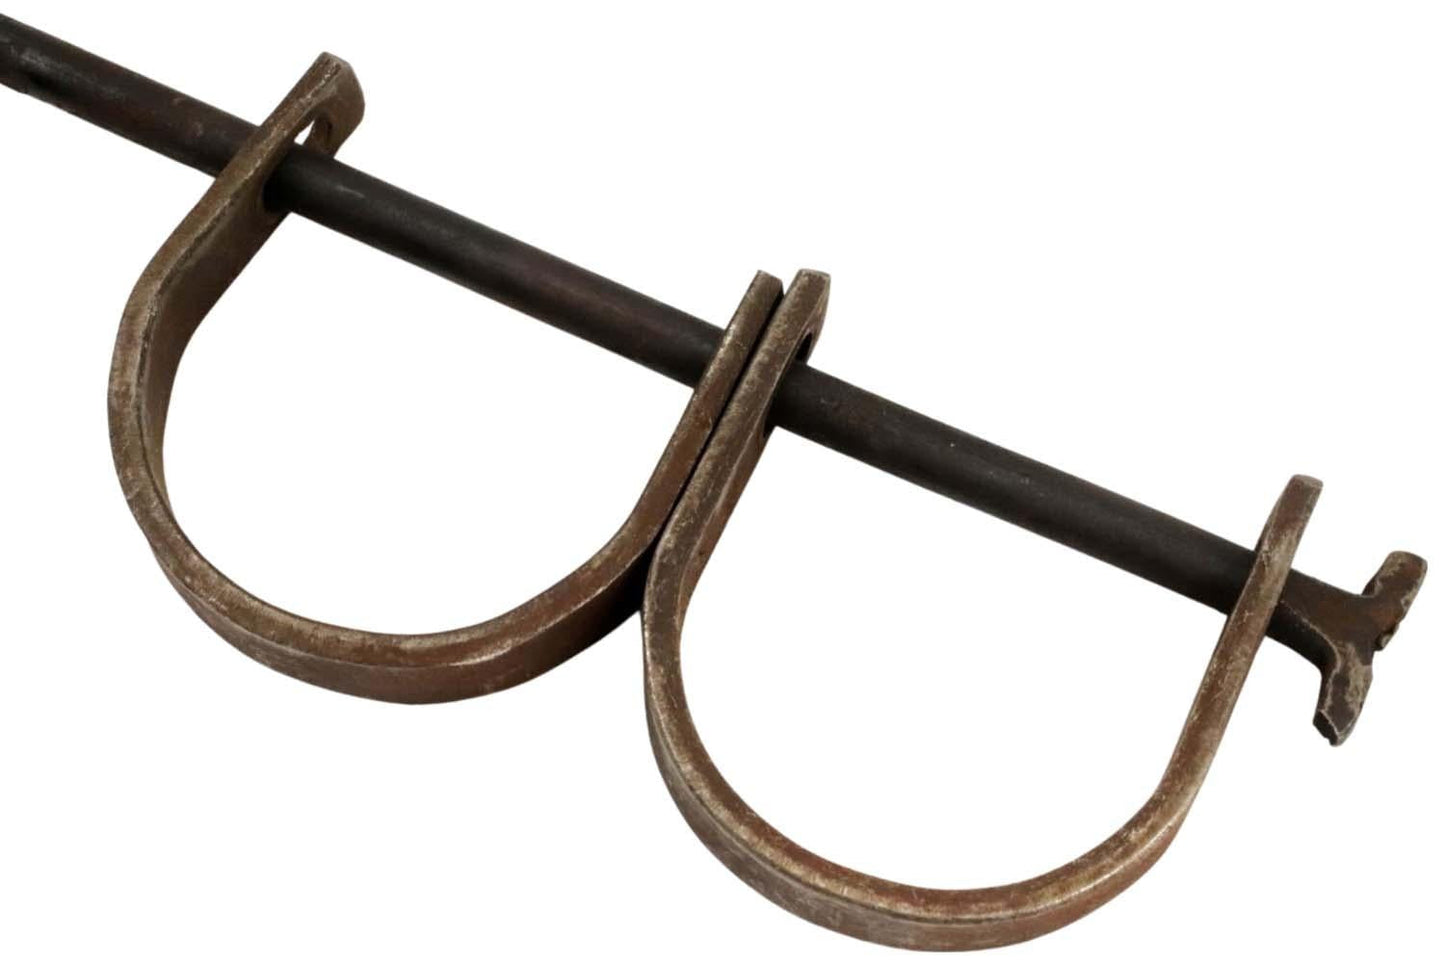 American Set Of Antique Leg Cuffs or Hand Cuffs With a Lock, Used By The Justice System & Police, Probably European or American, Circa 18th-19th C.